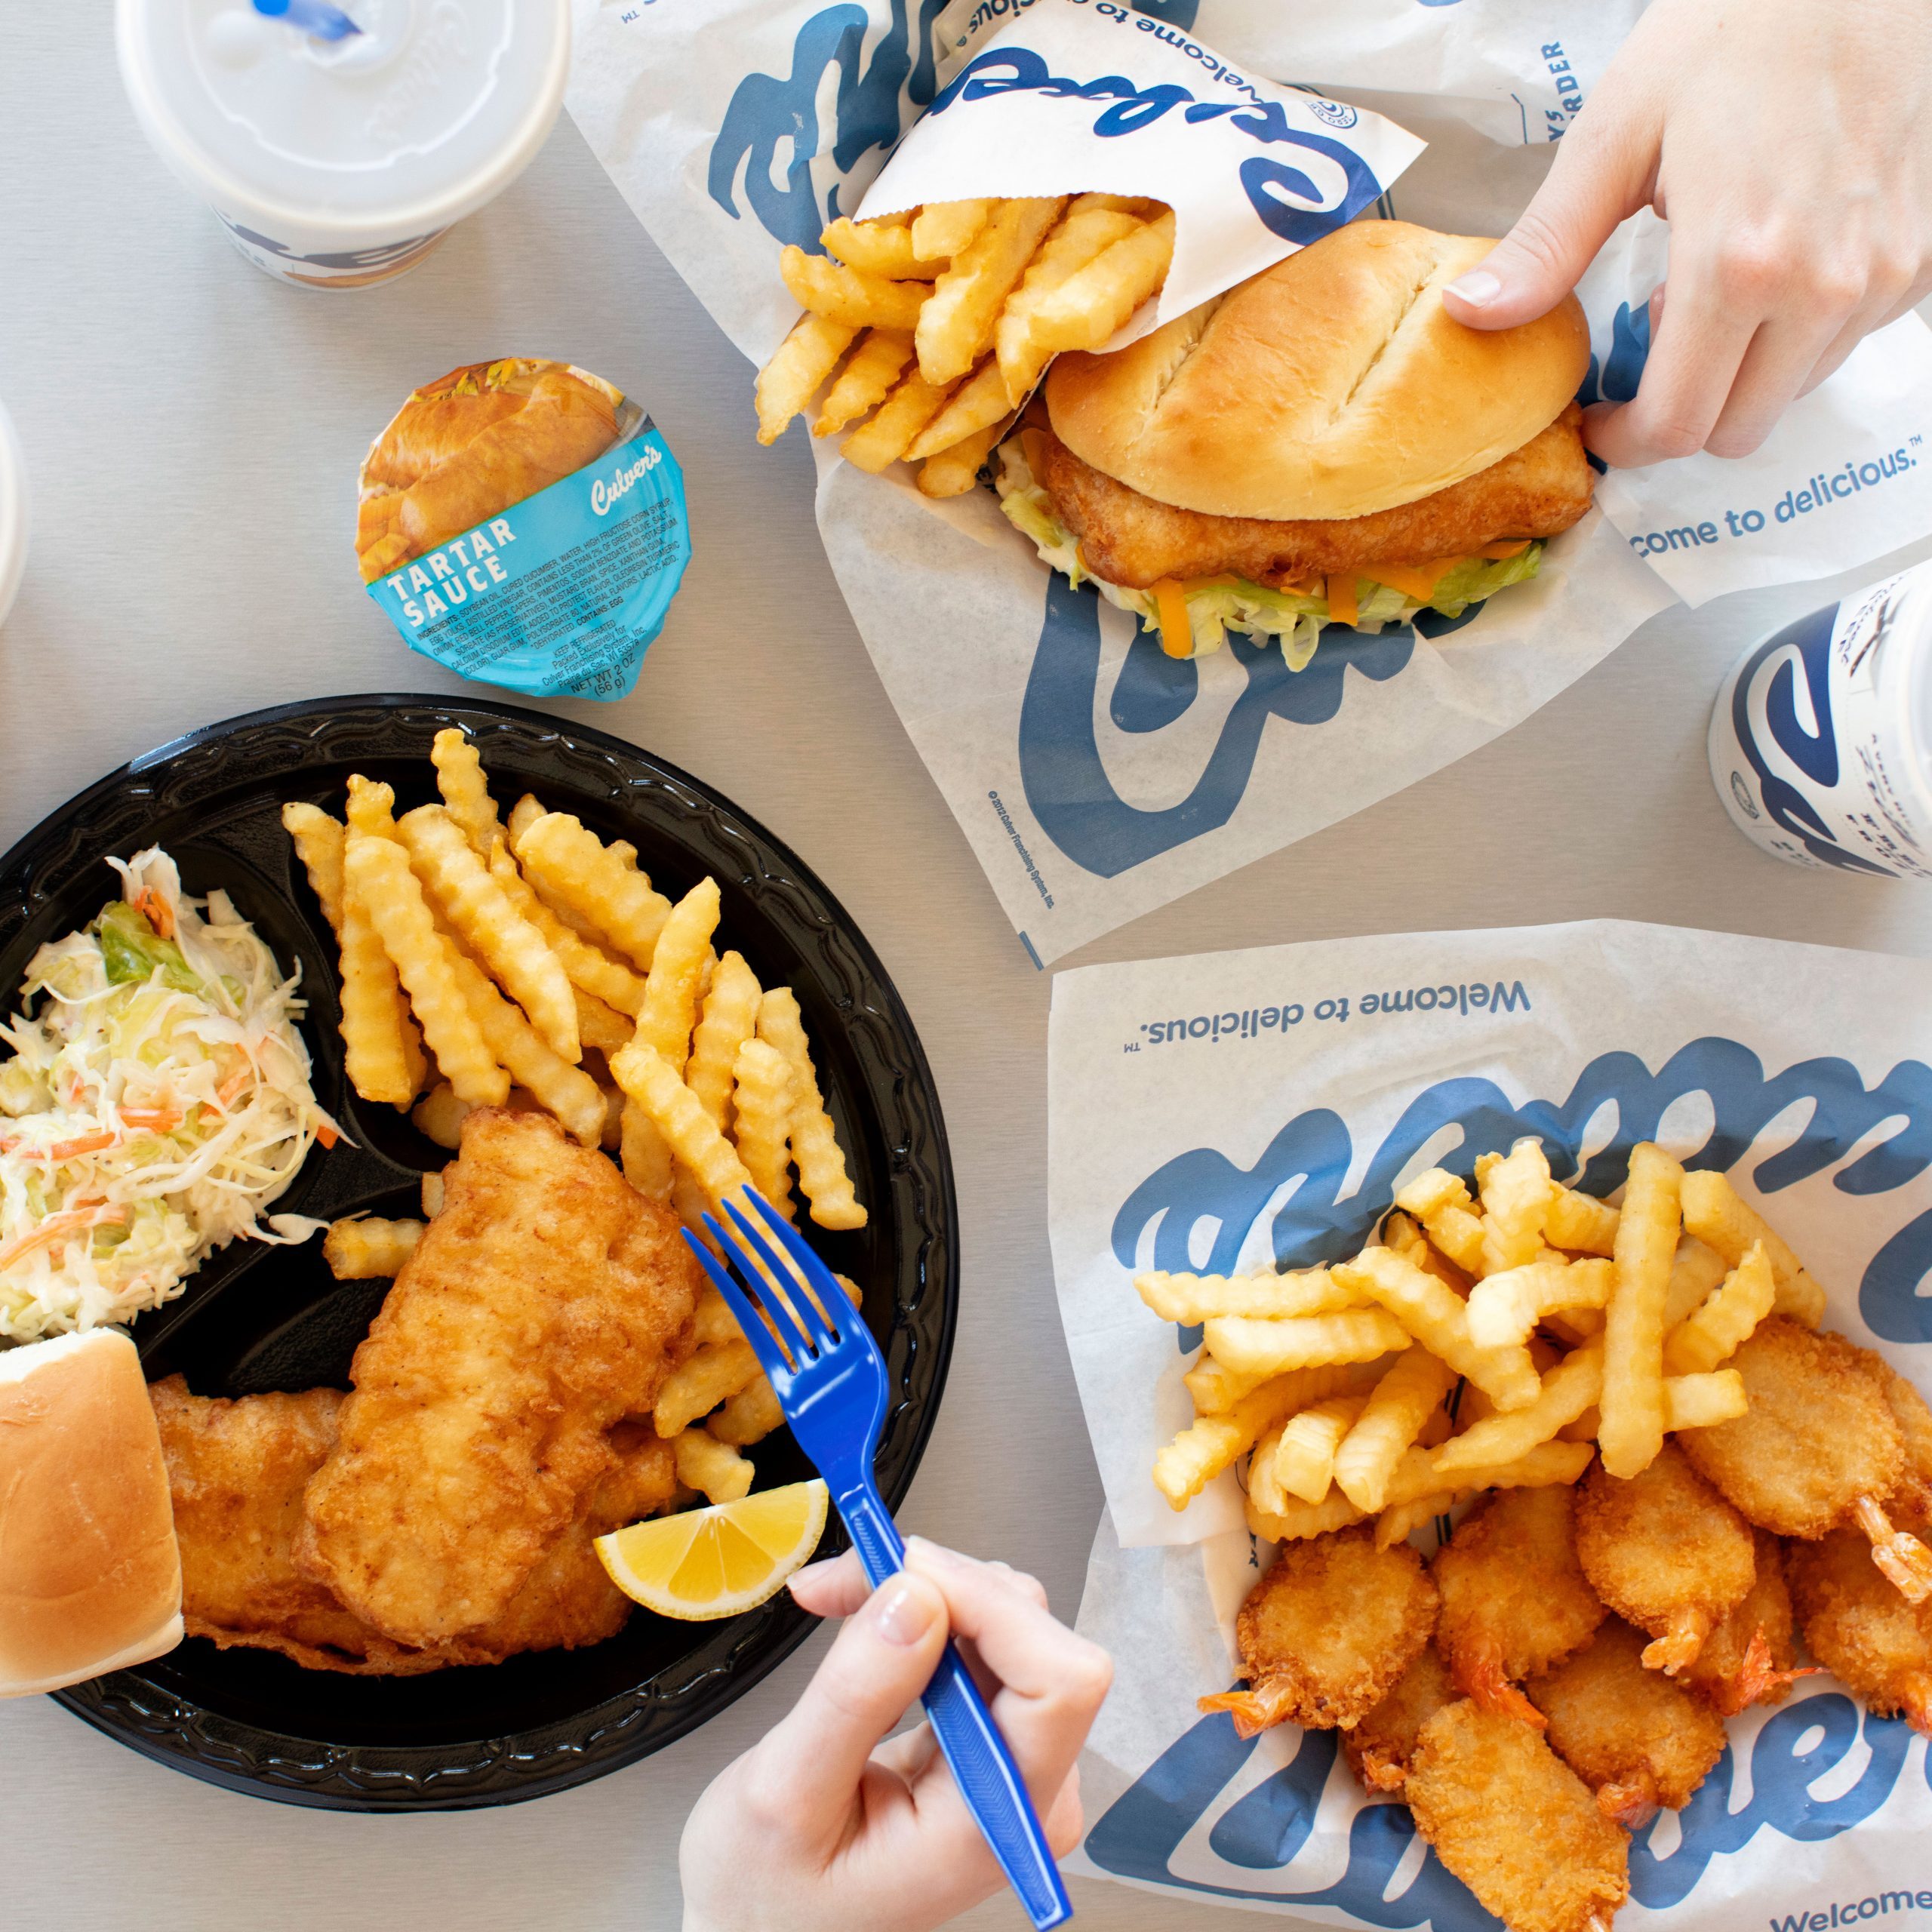 10 Fast Food Chains That Have Fish on the Menu for Lent